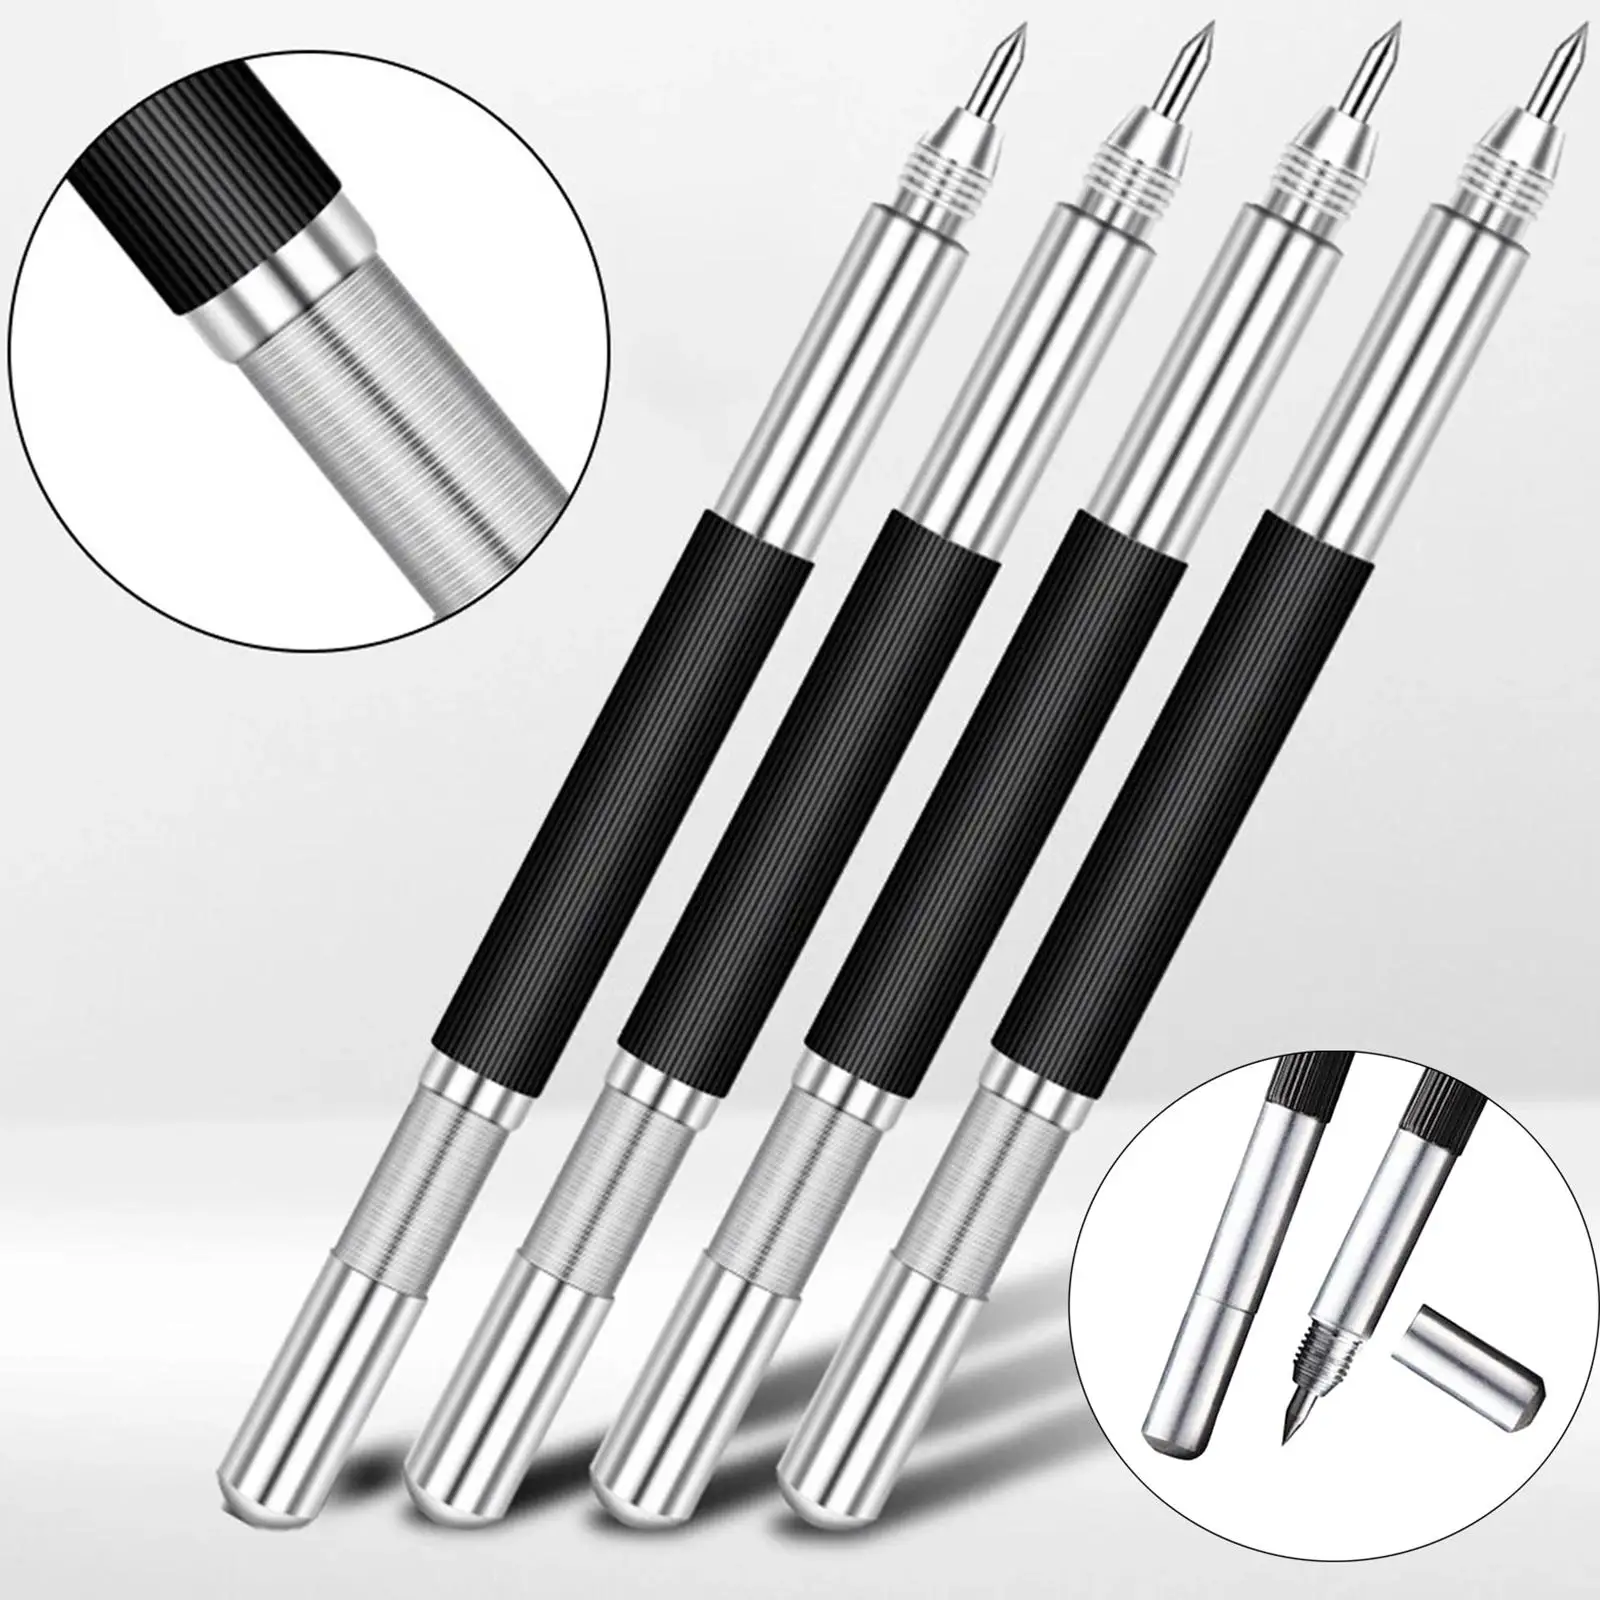 4Pcs Double-Ended Etching Engraving Pen Lettering Pen Stainless Steel Hand Tools Tungsten Carbide Scribing Pens for Glass